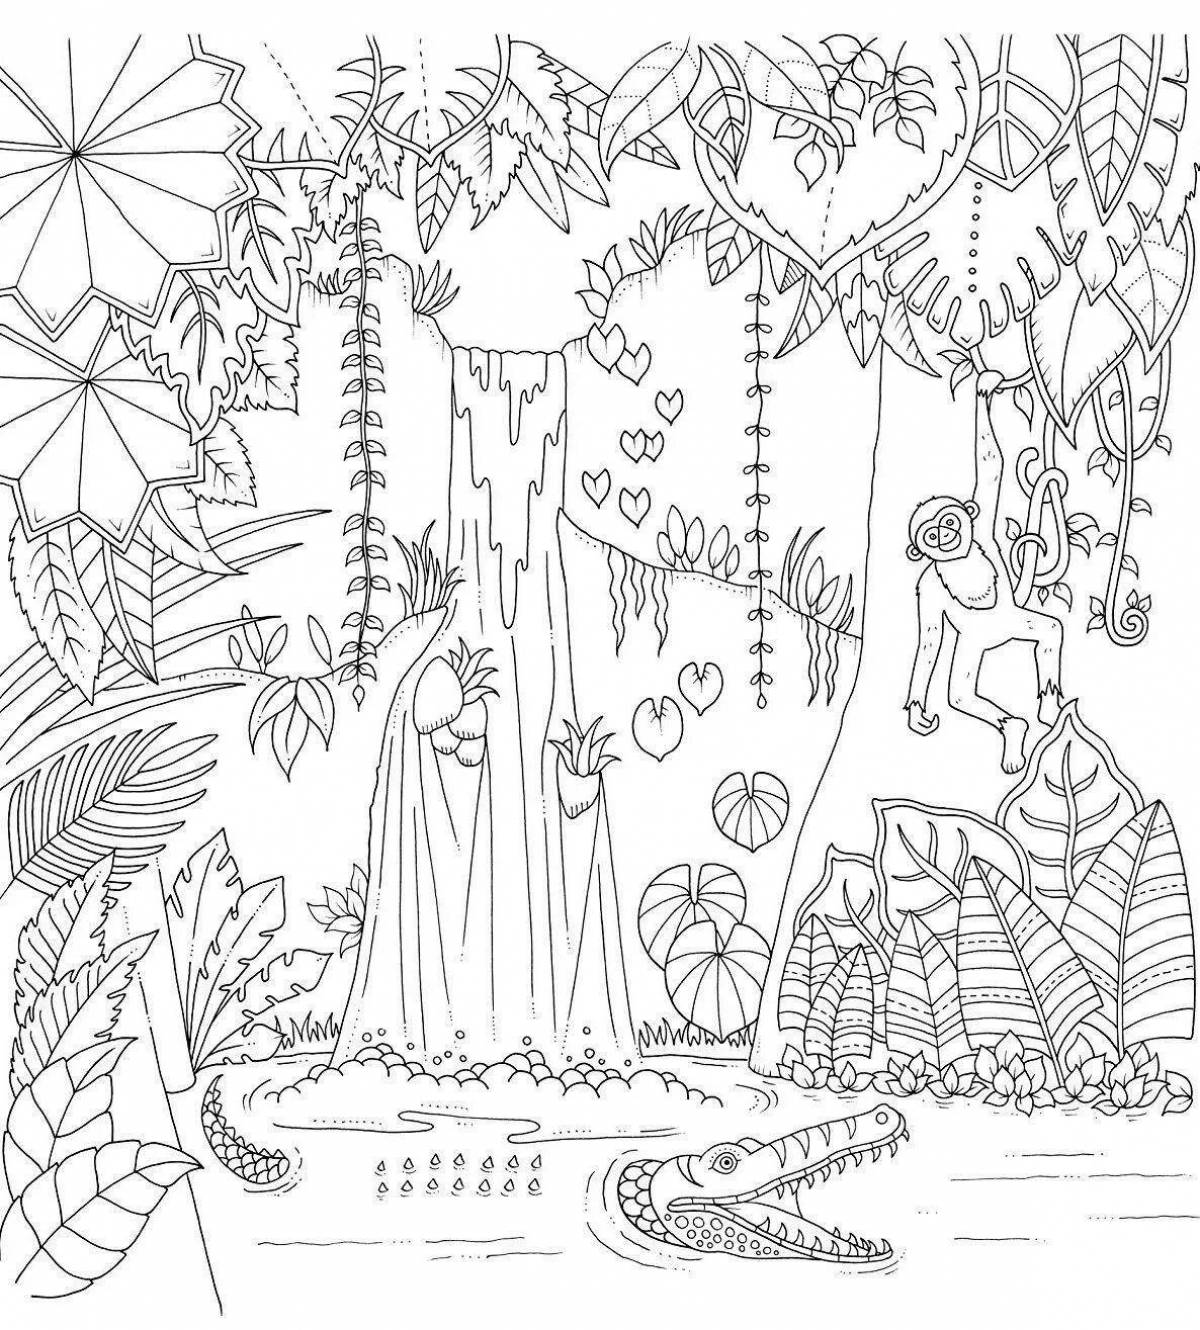 Amazing jungle coloring page - radiant